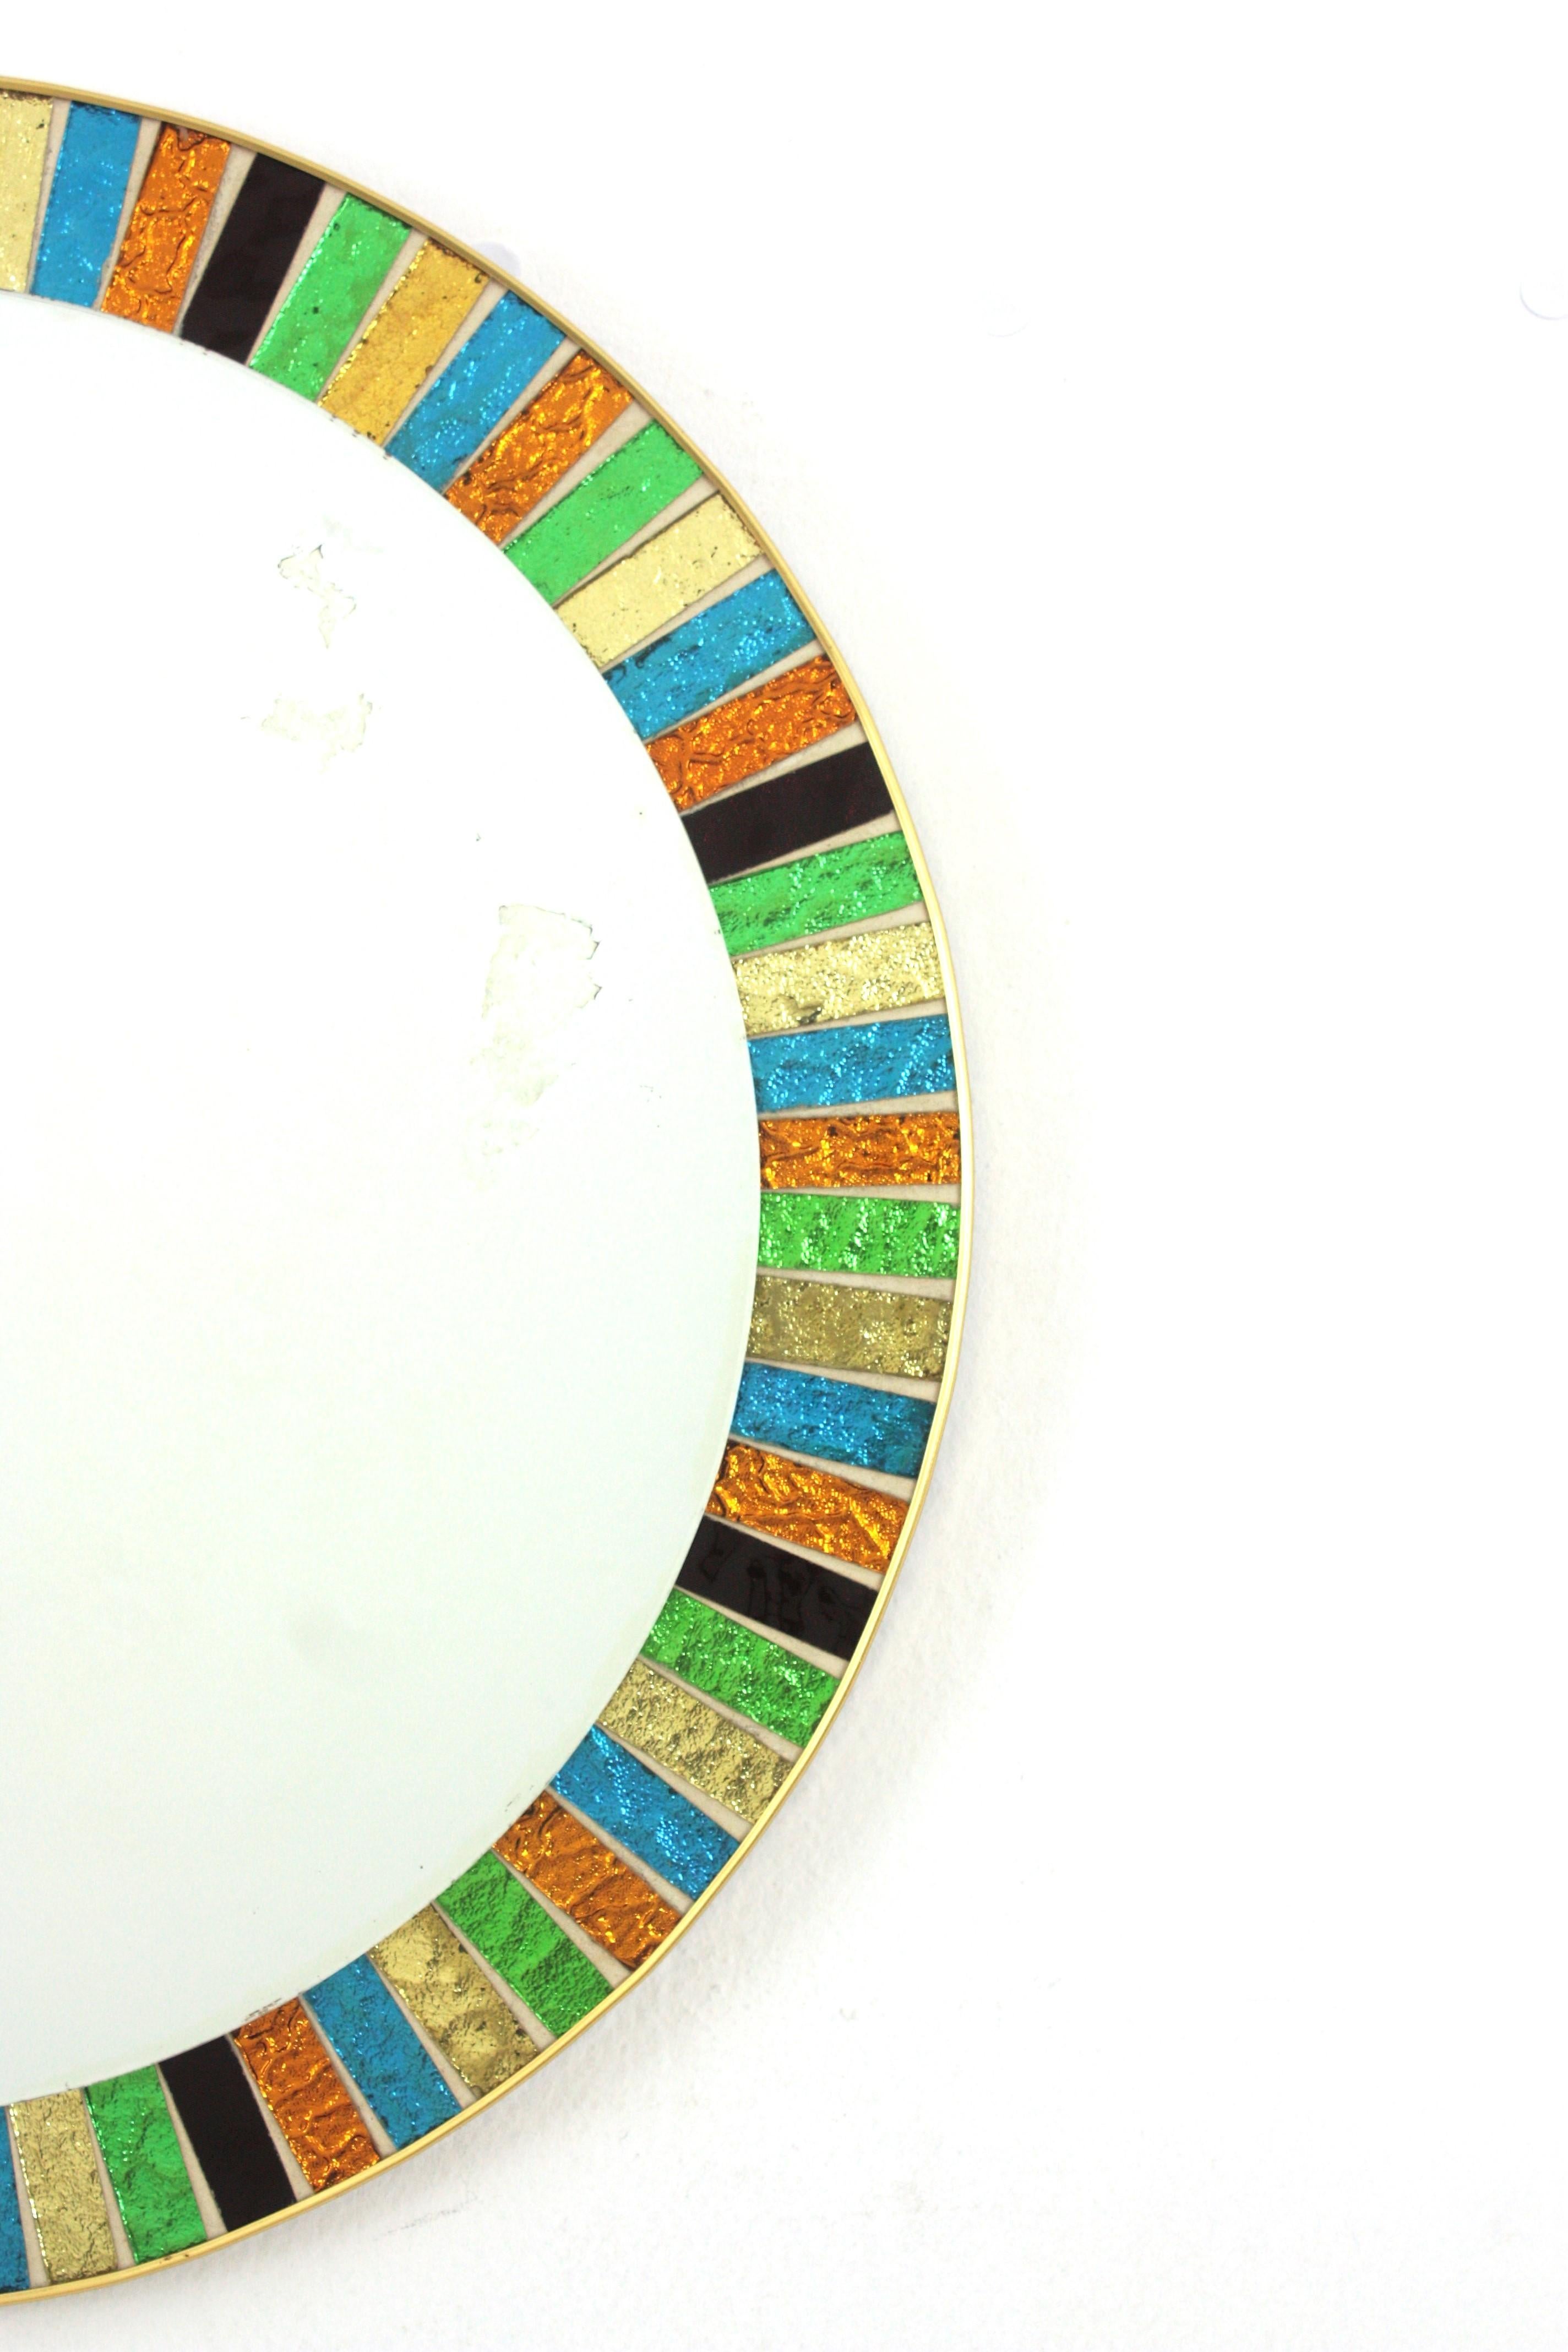 20th Century MDM Round Sunburst Mirror with Multicolor Glass Mosaic Frame For Sale